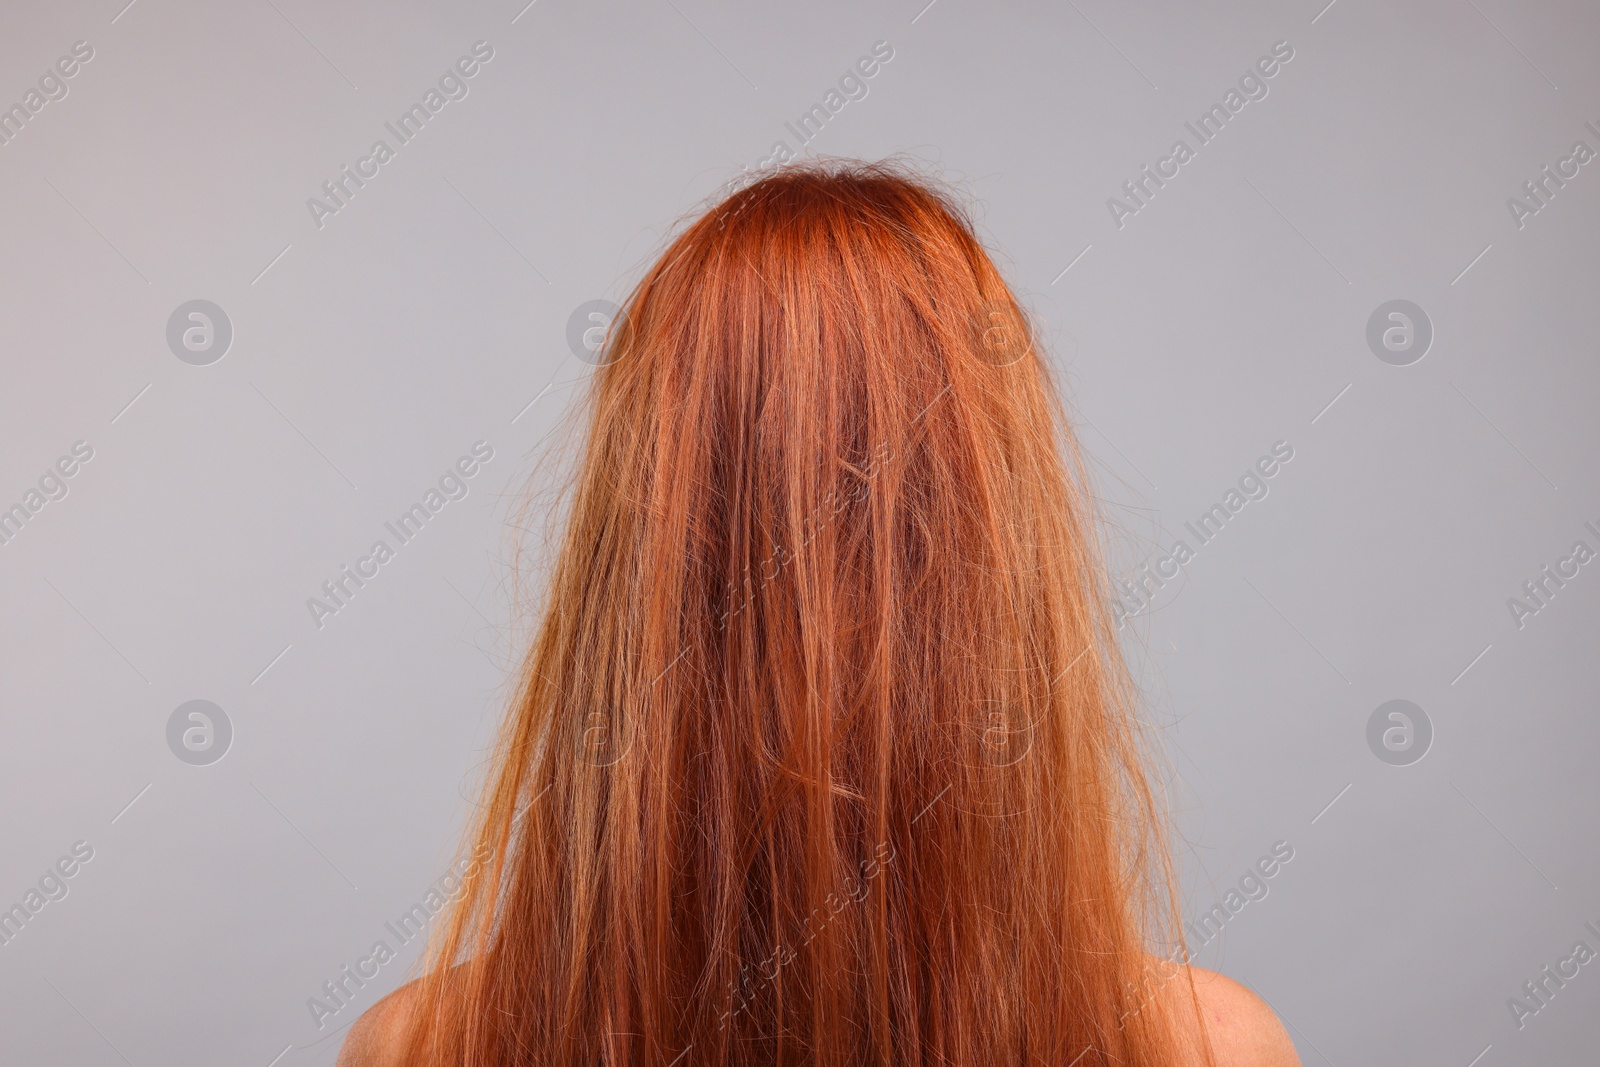 Photo of Woman with damaged messy hair on light grey background, back view